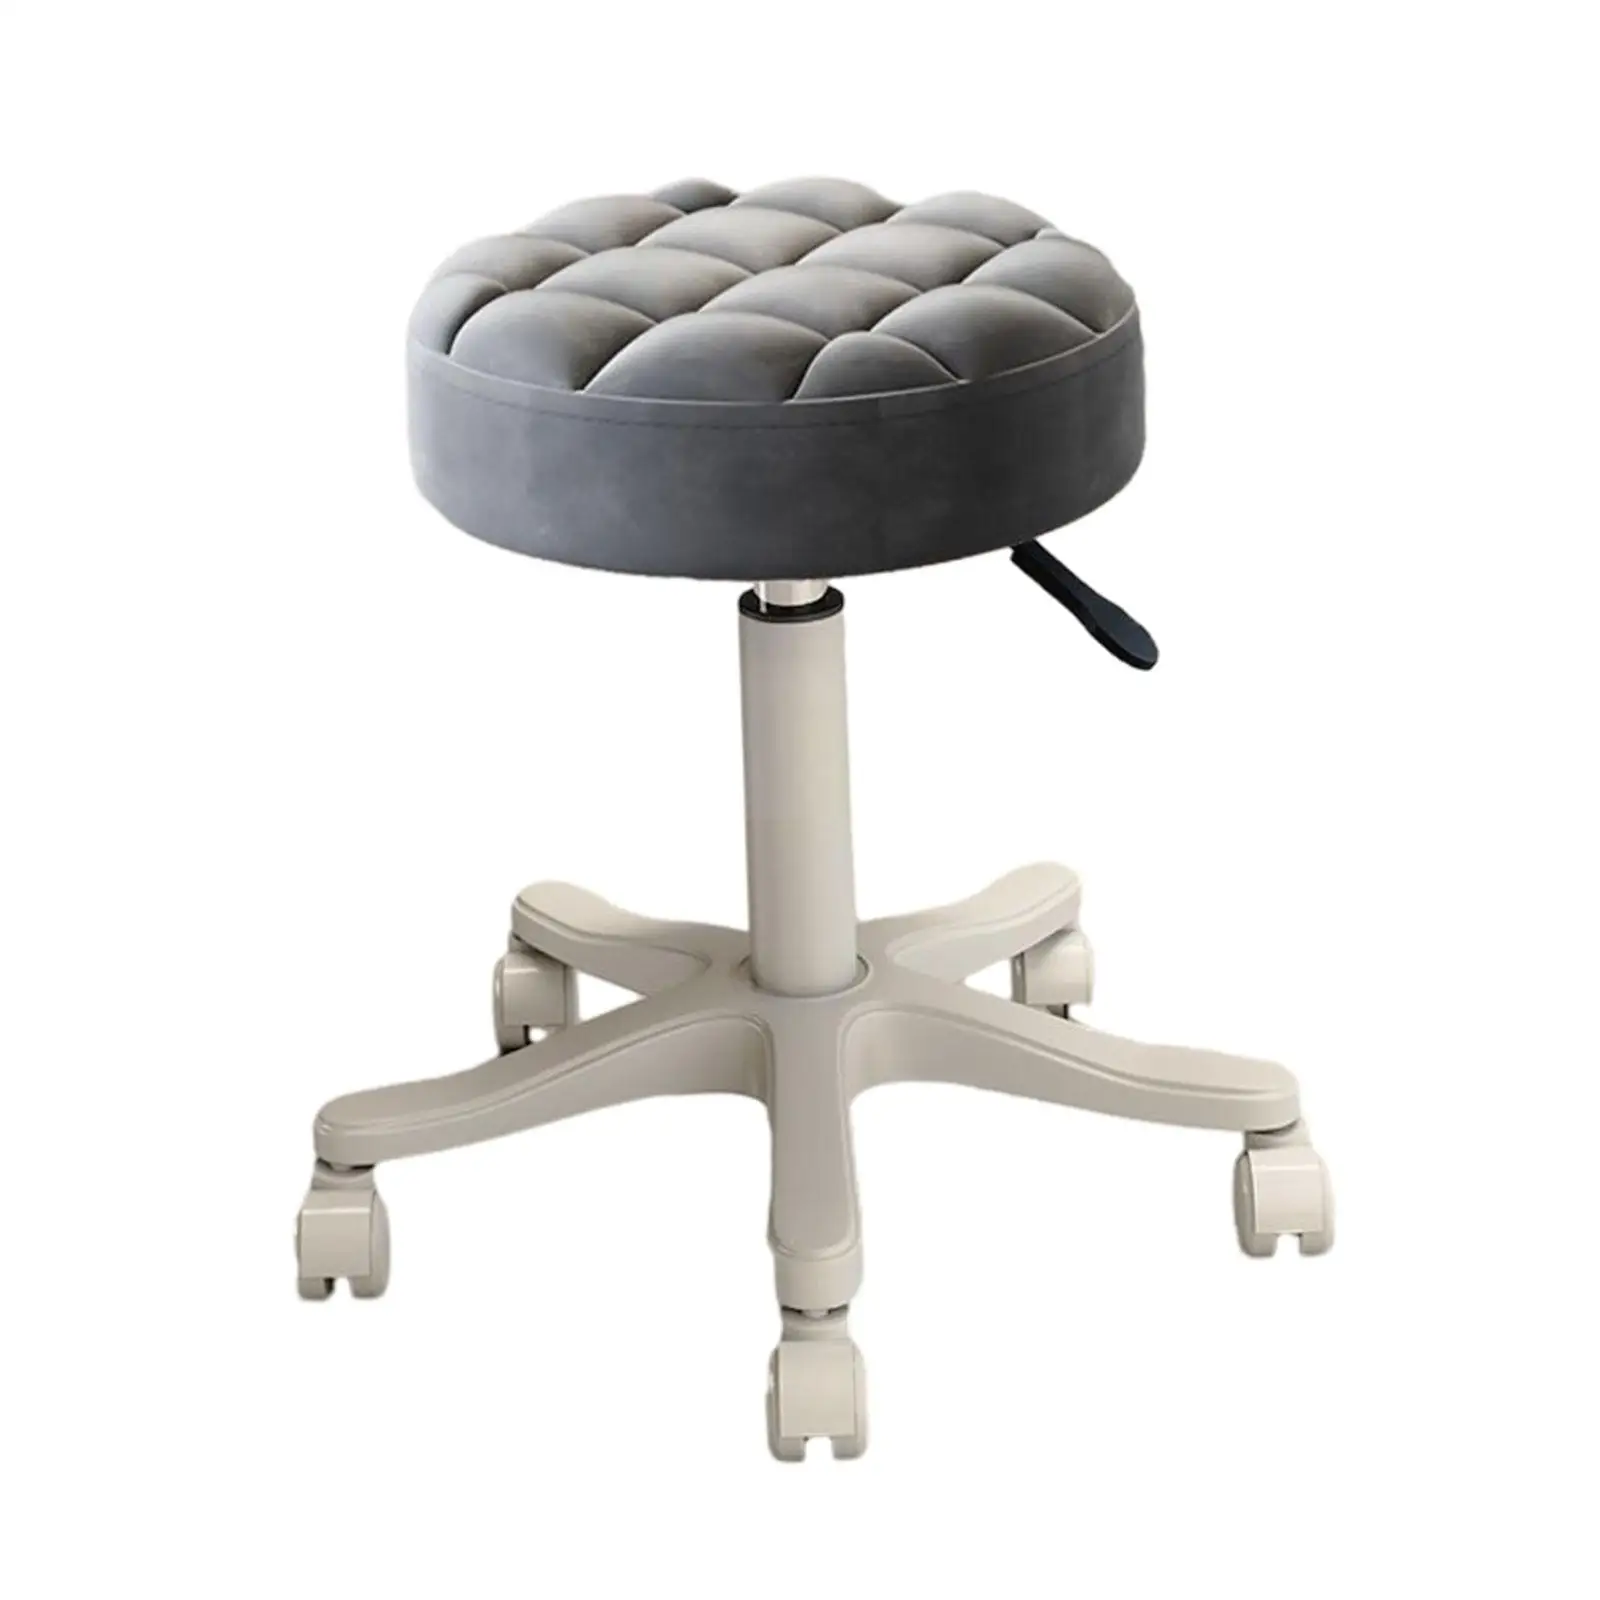 PU Leather Round Rolling Stool Lift Stool Thick Seat Padding Bar Stool with Wheels for Lab, Housework, Barbershop, Home, SPA